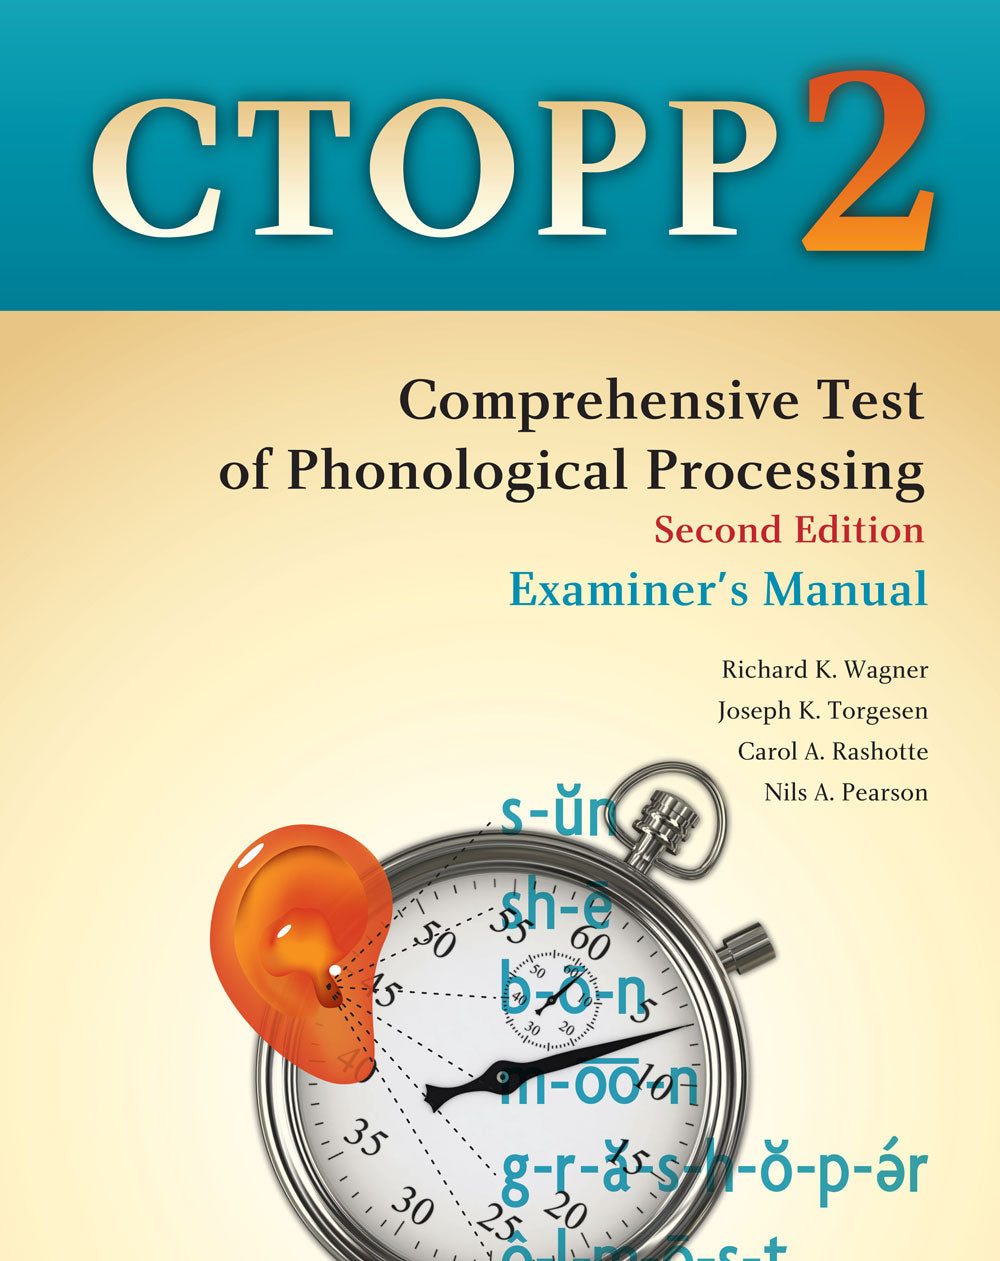 Comprehensive Test of Phonological Processing - Second Edition (CTOPP-2)